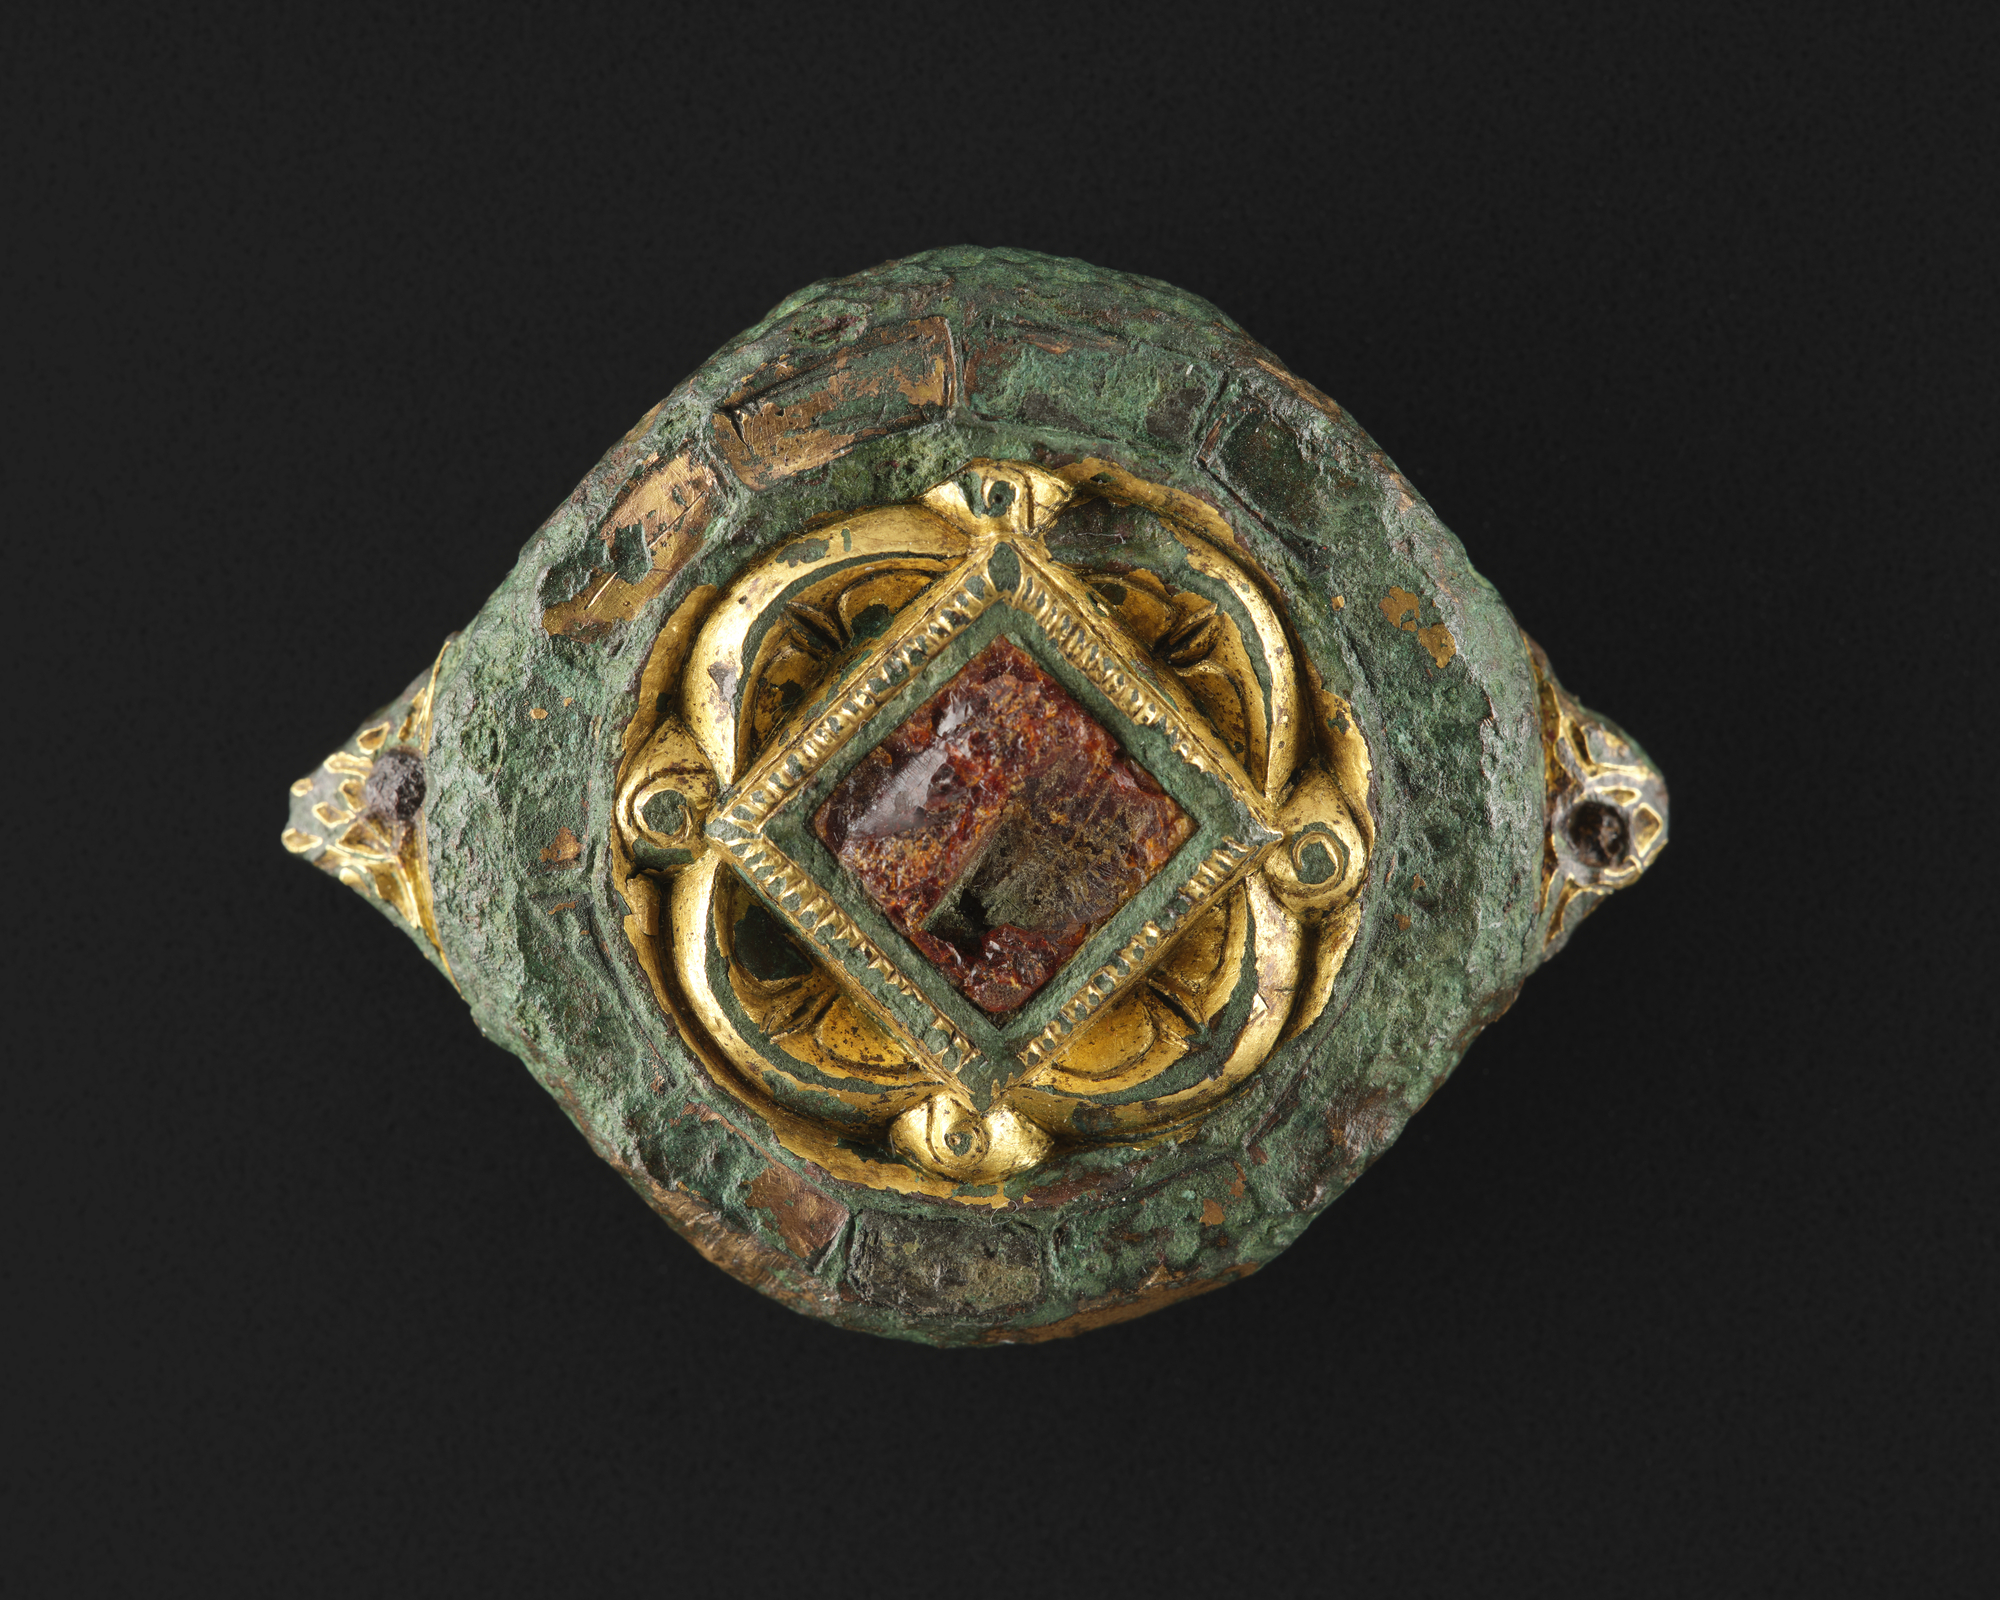 Image of Circular mount of gilt copper alloy with two triangular projections on circumference, from the west of Scotland, 800 - 1000 AD © National Museums Scotland